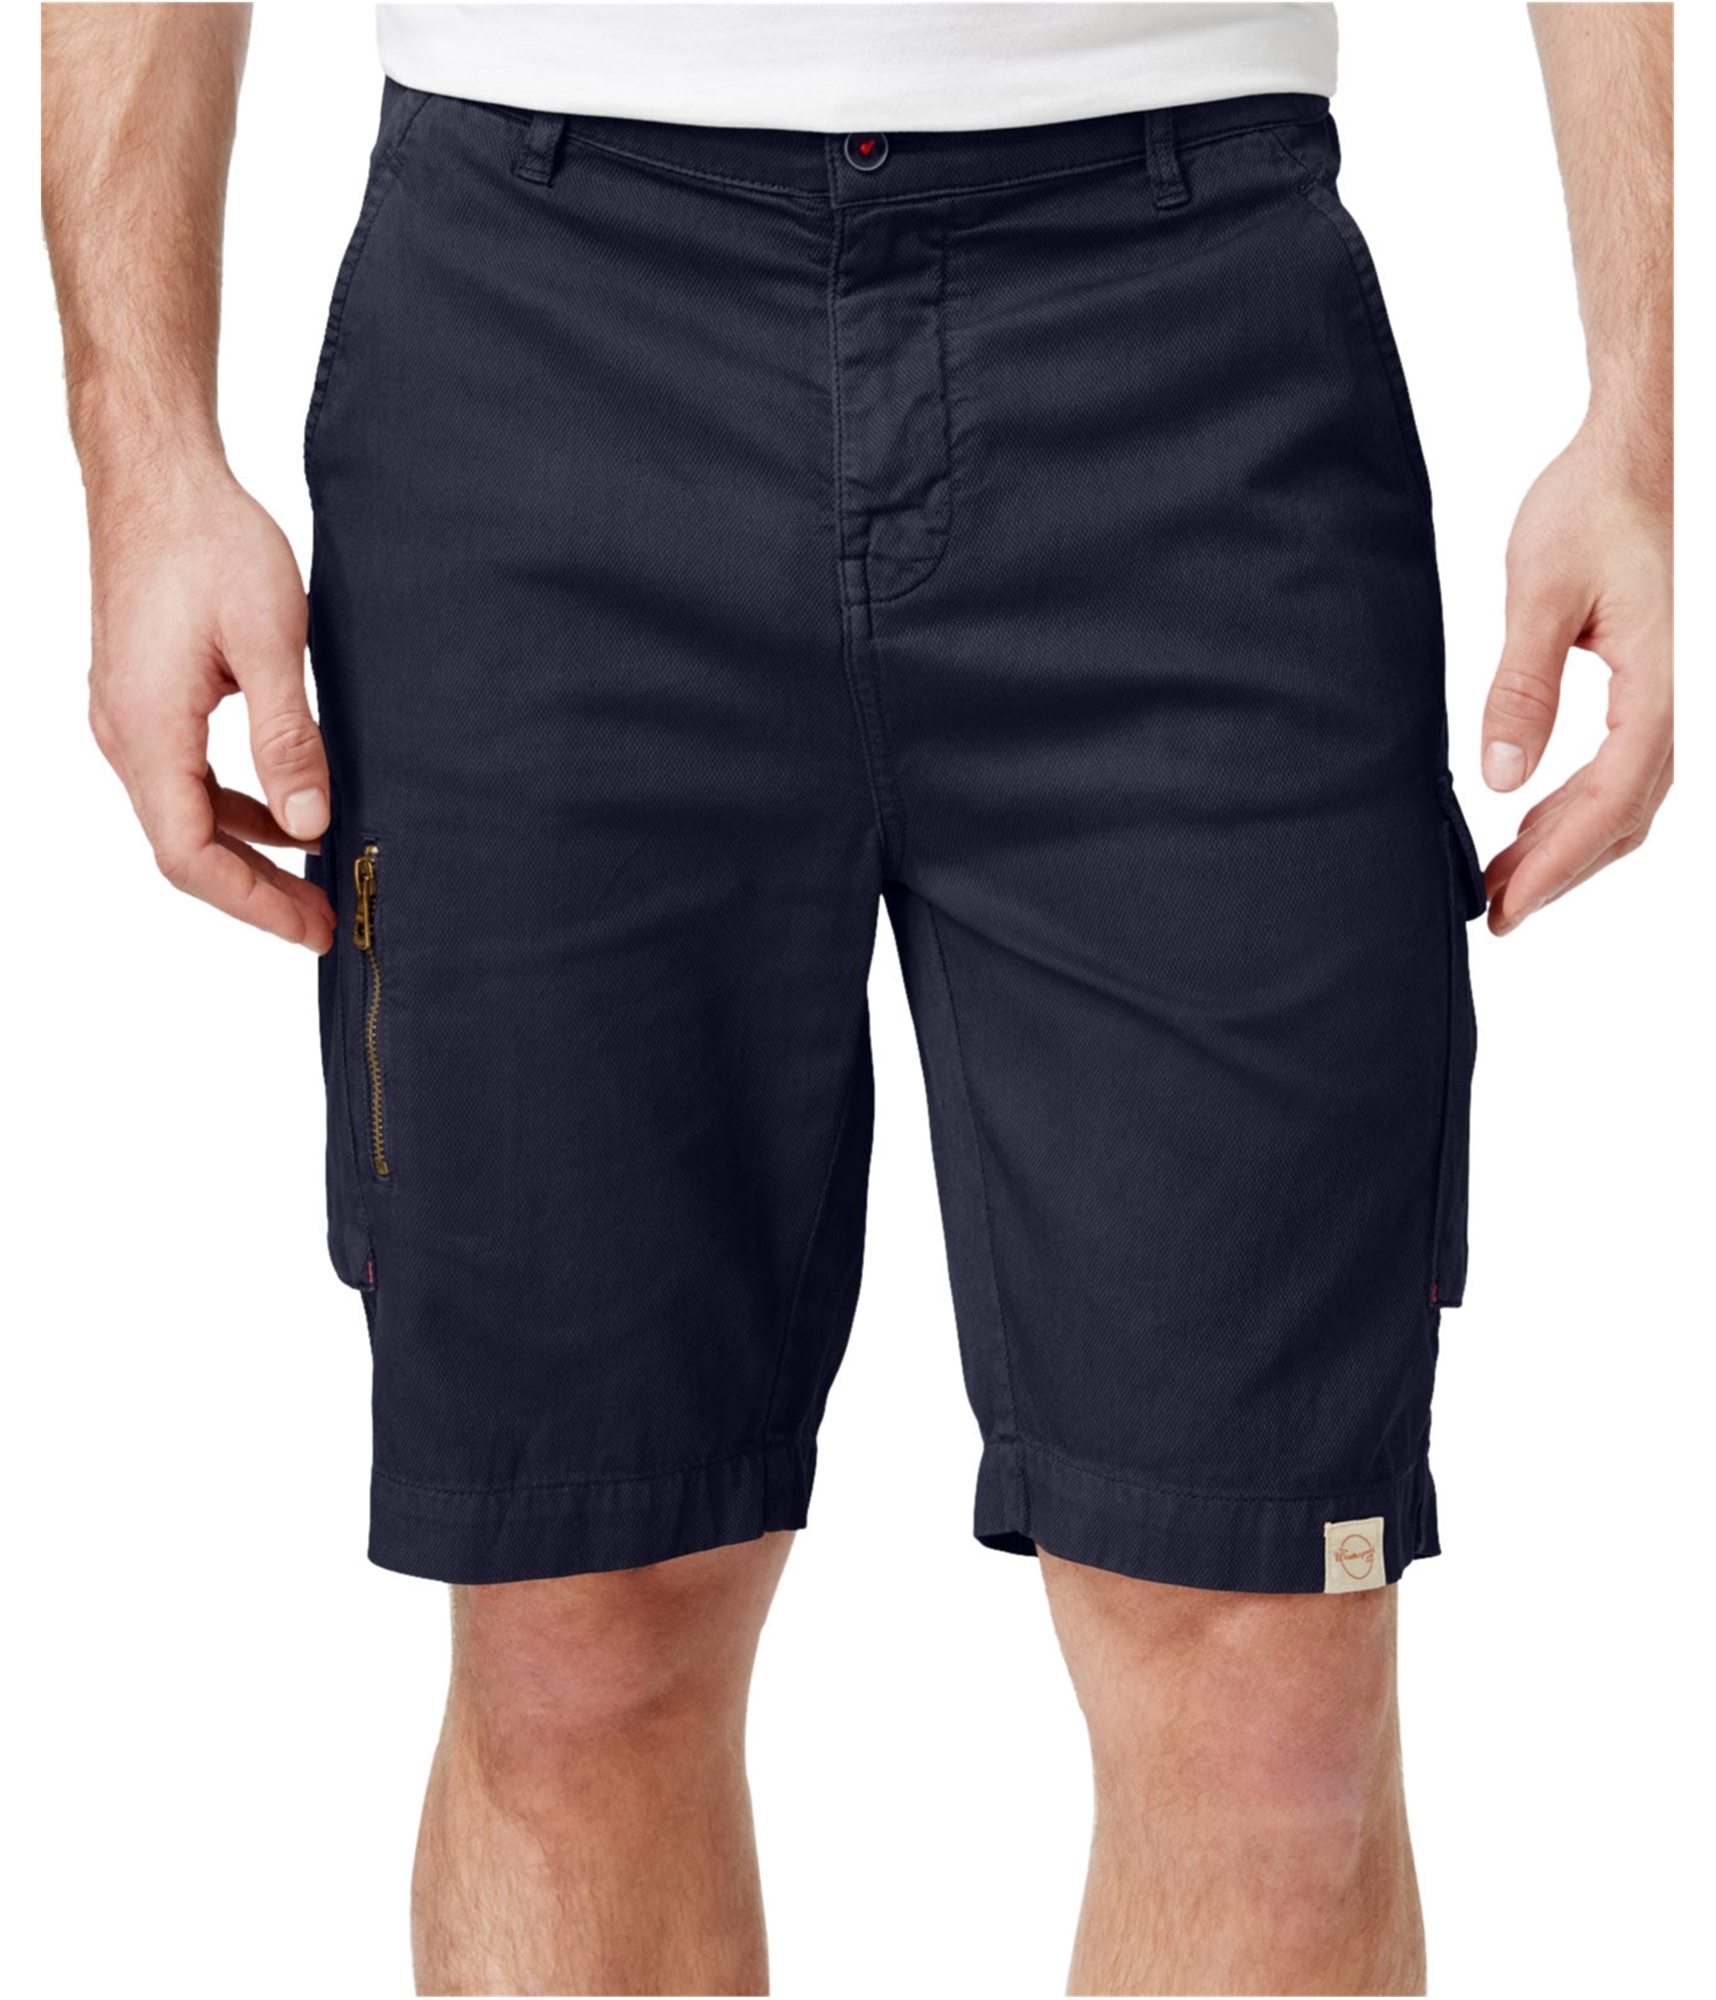 weatherproof brand mens shorts - OFF-58% >Free Delivery